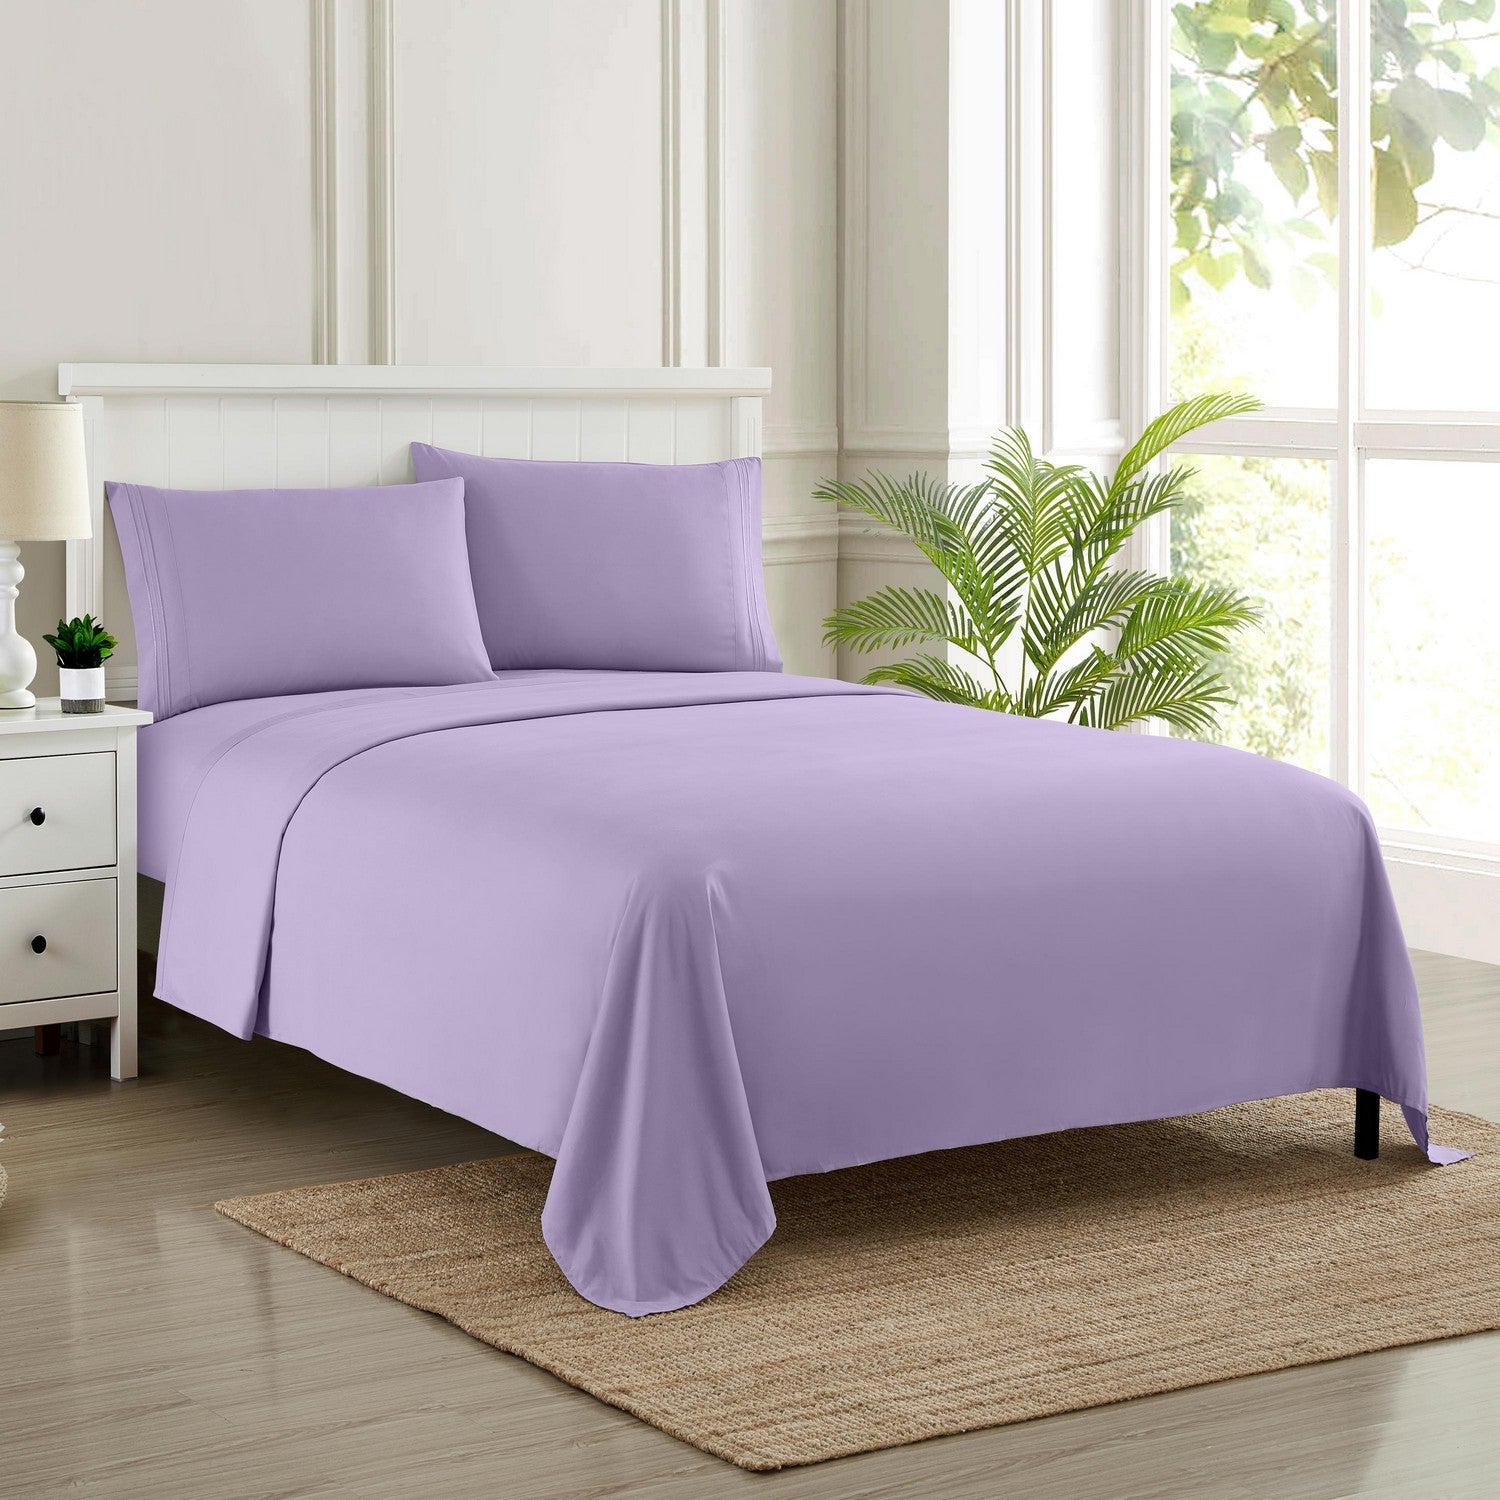 Classic 4-Piece Bed Sheet Set (Lavender) - Bed